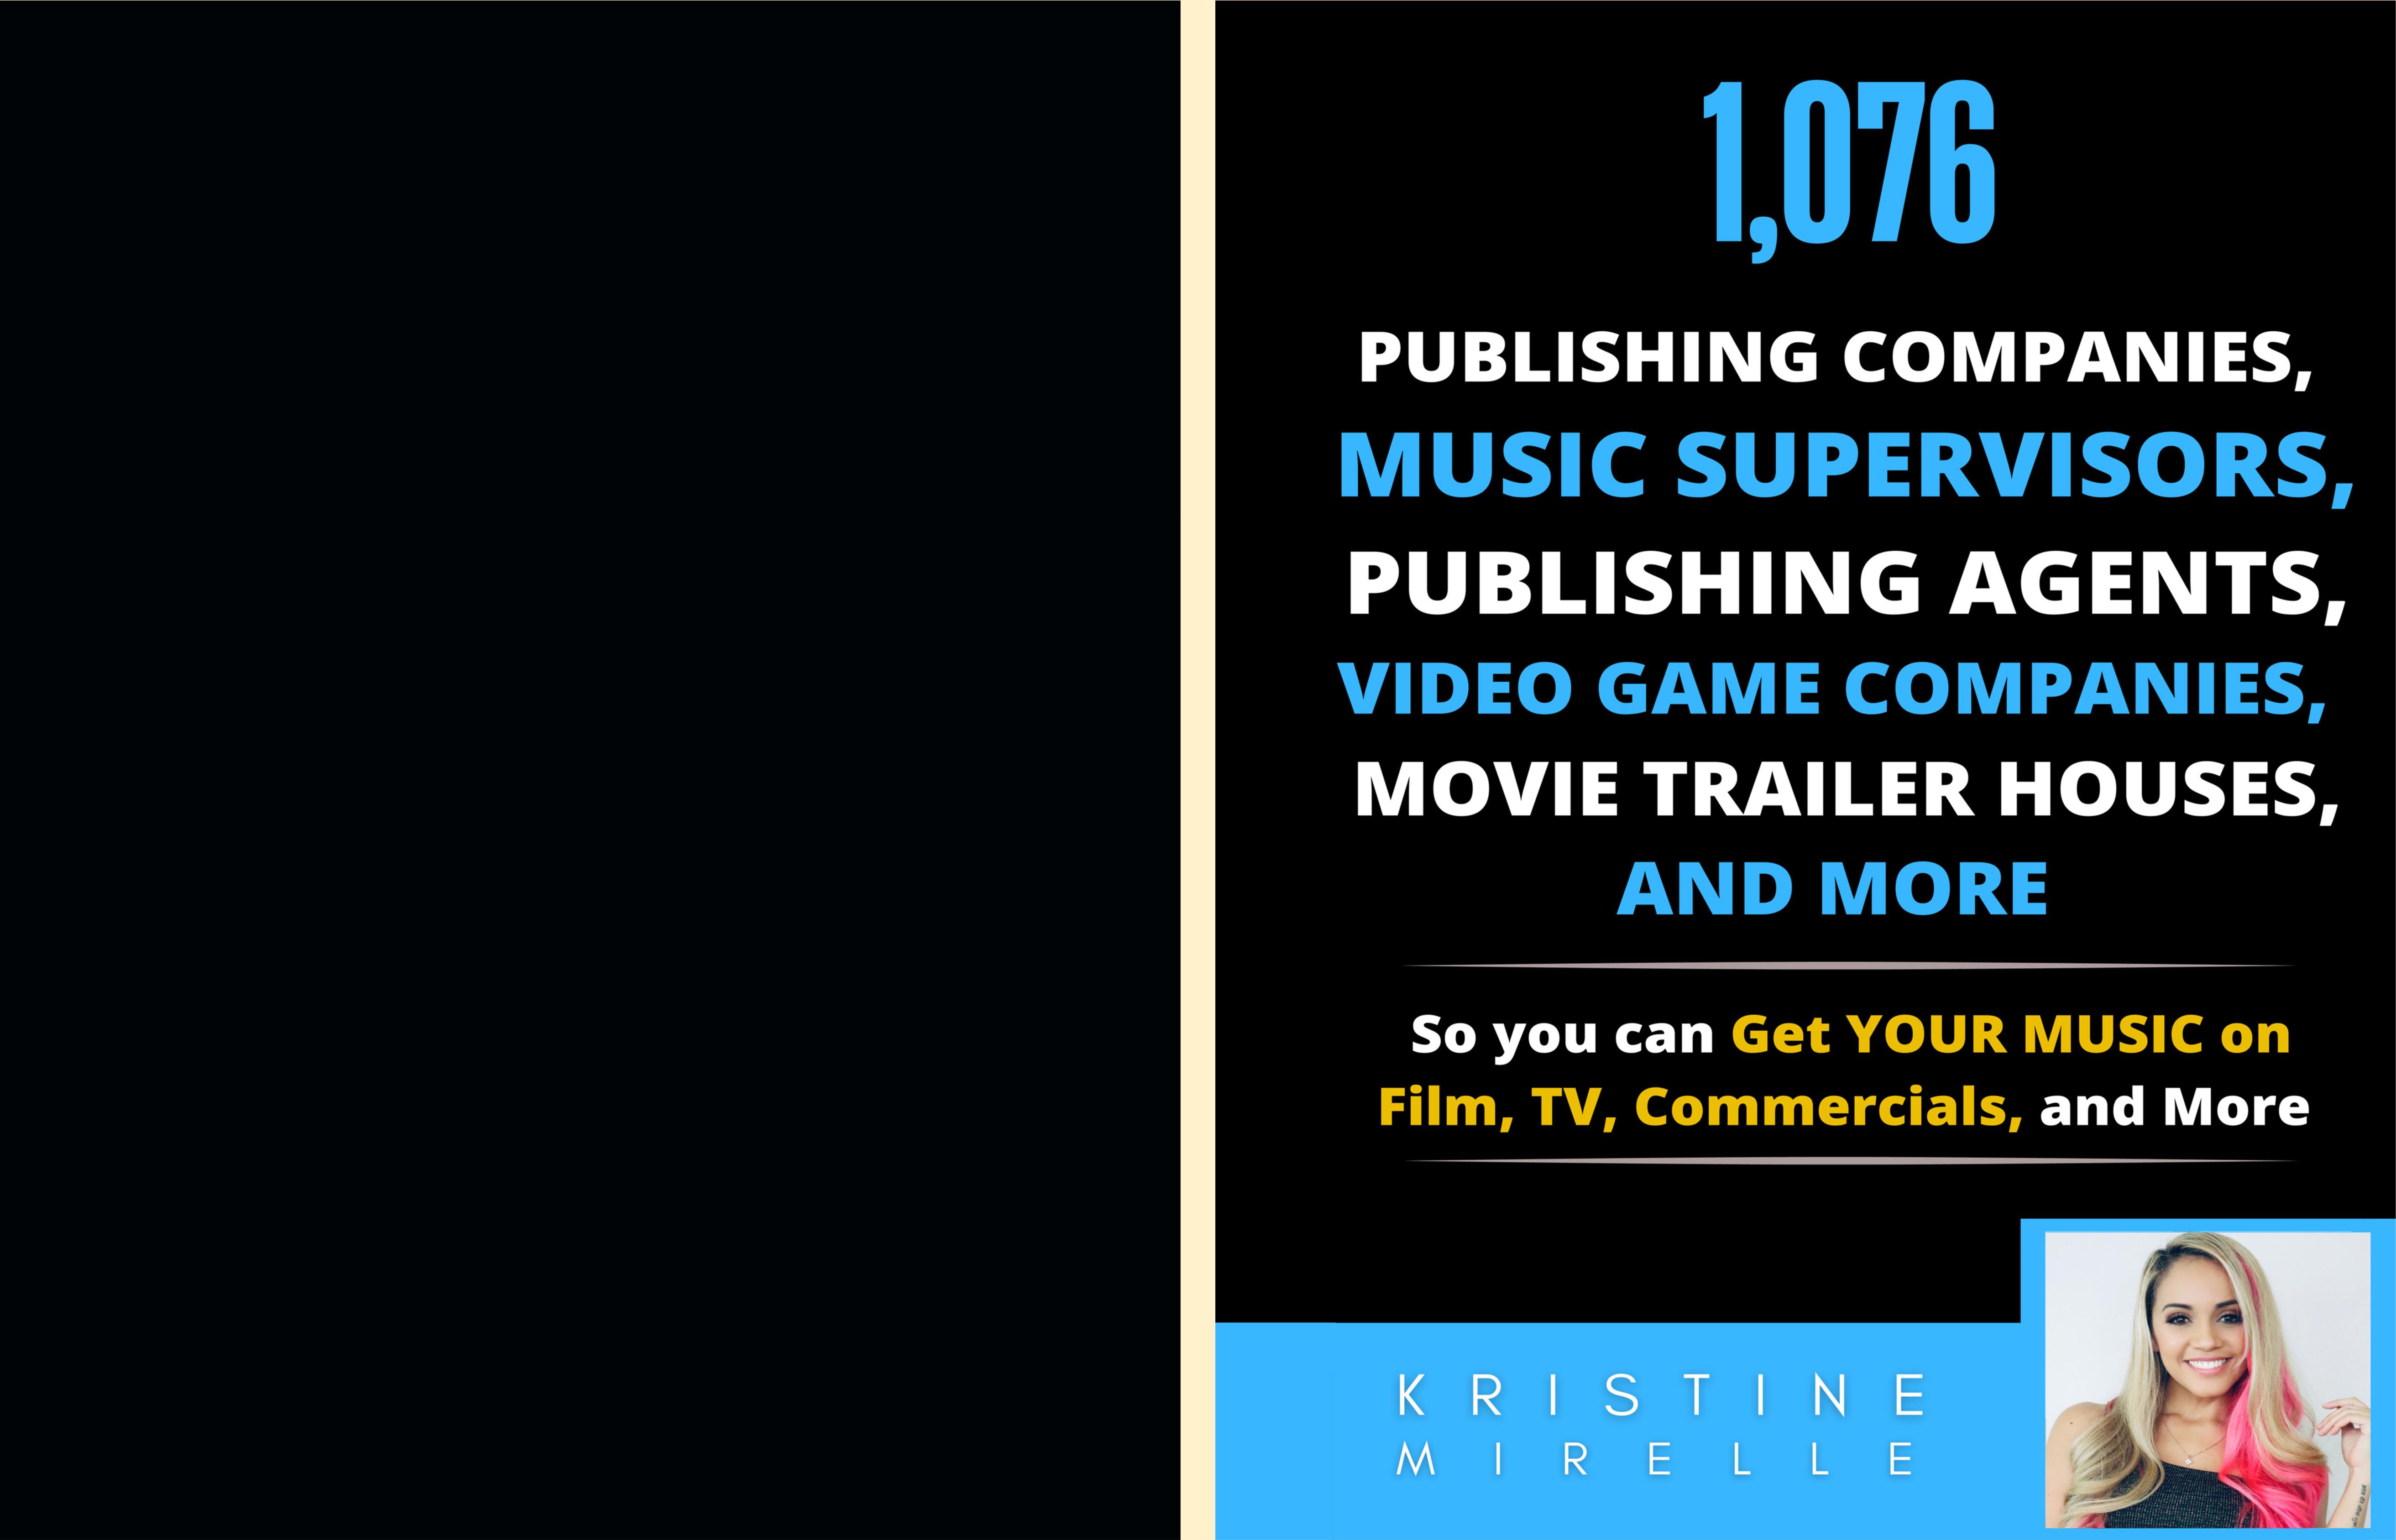 1076 Publishing Companies, Music Supervisors, Publishing Agents, Video Game Companies, Movie Trailer Houses, and More...So You Can Get Your Music on Film, TV, Commercials, and More cover image